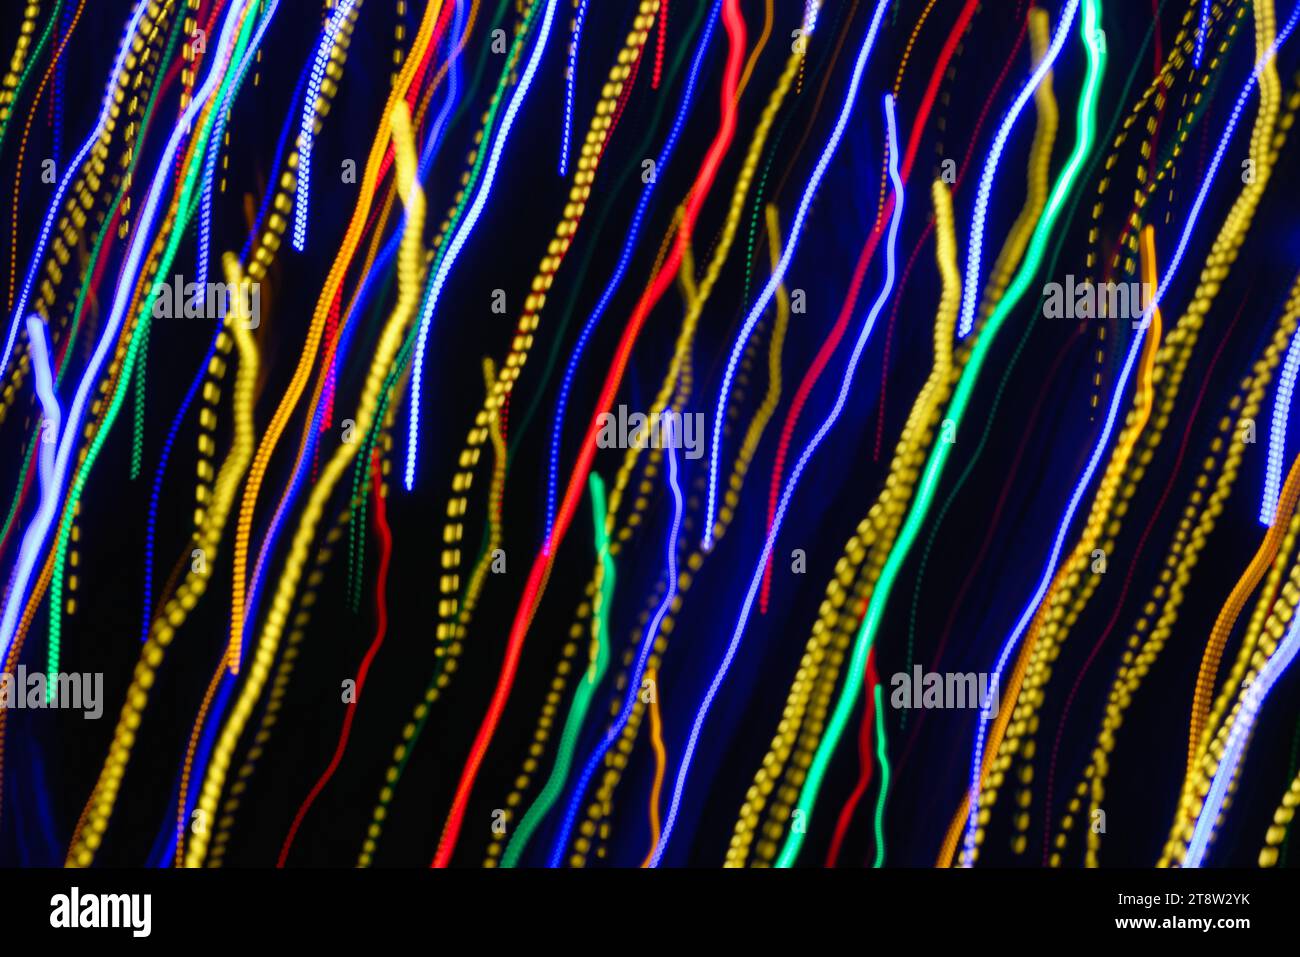 Blurred multi coloured light pattern streaks against a dark background creating abstract shapes Stock Photo